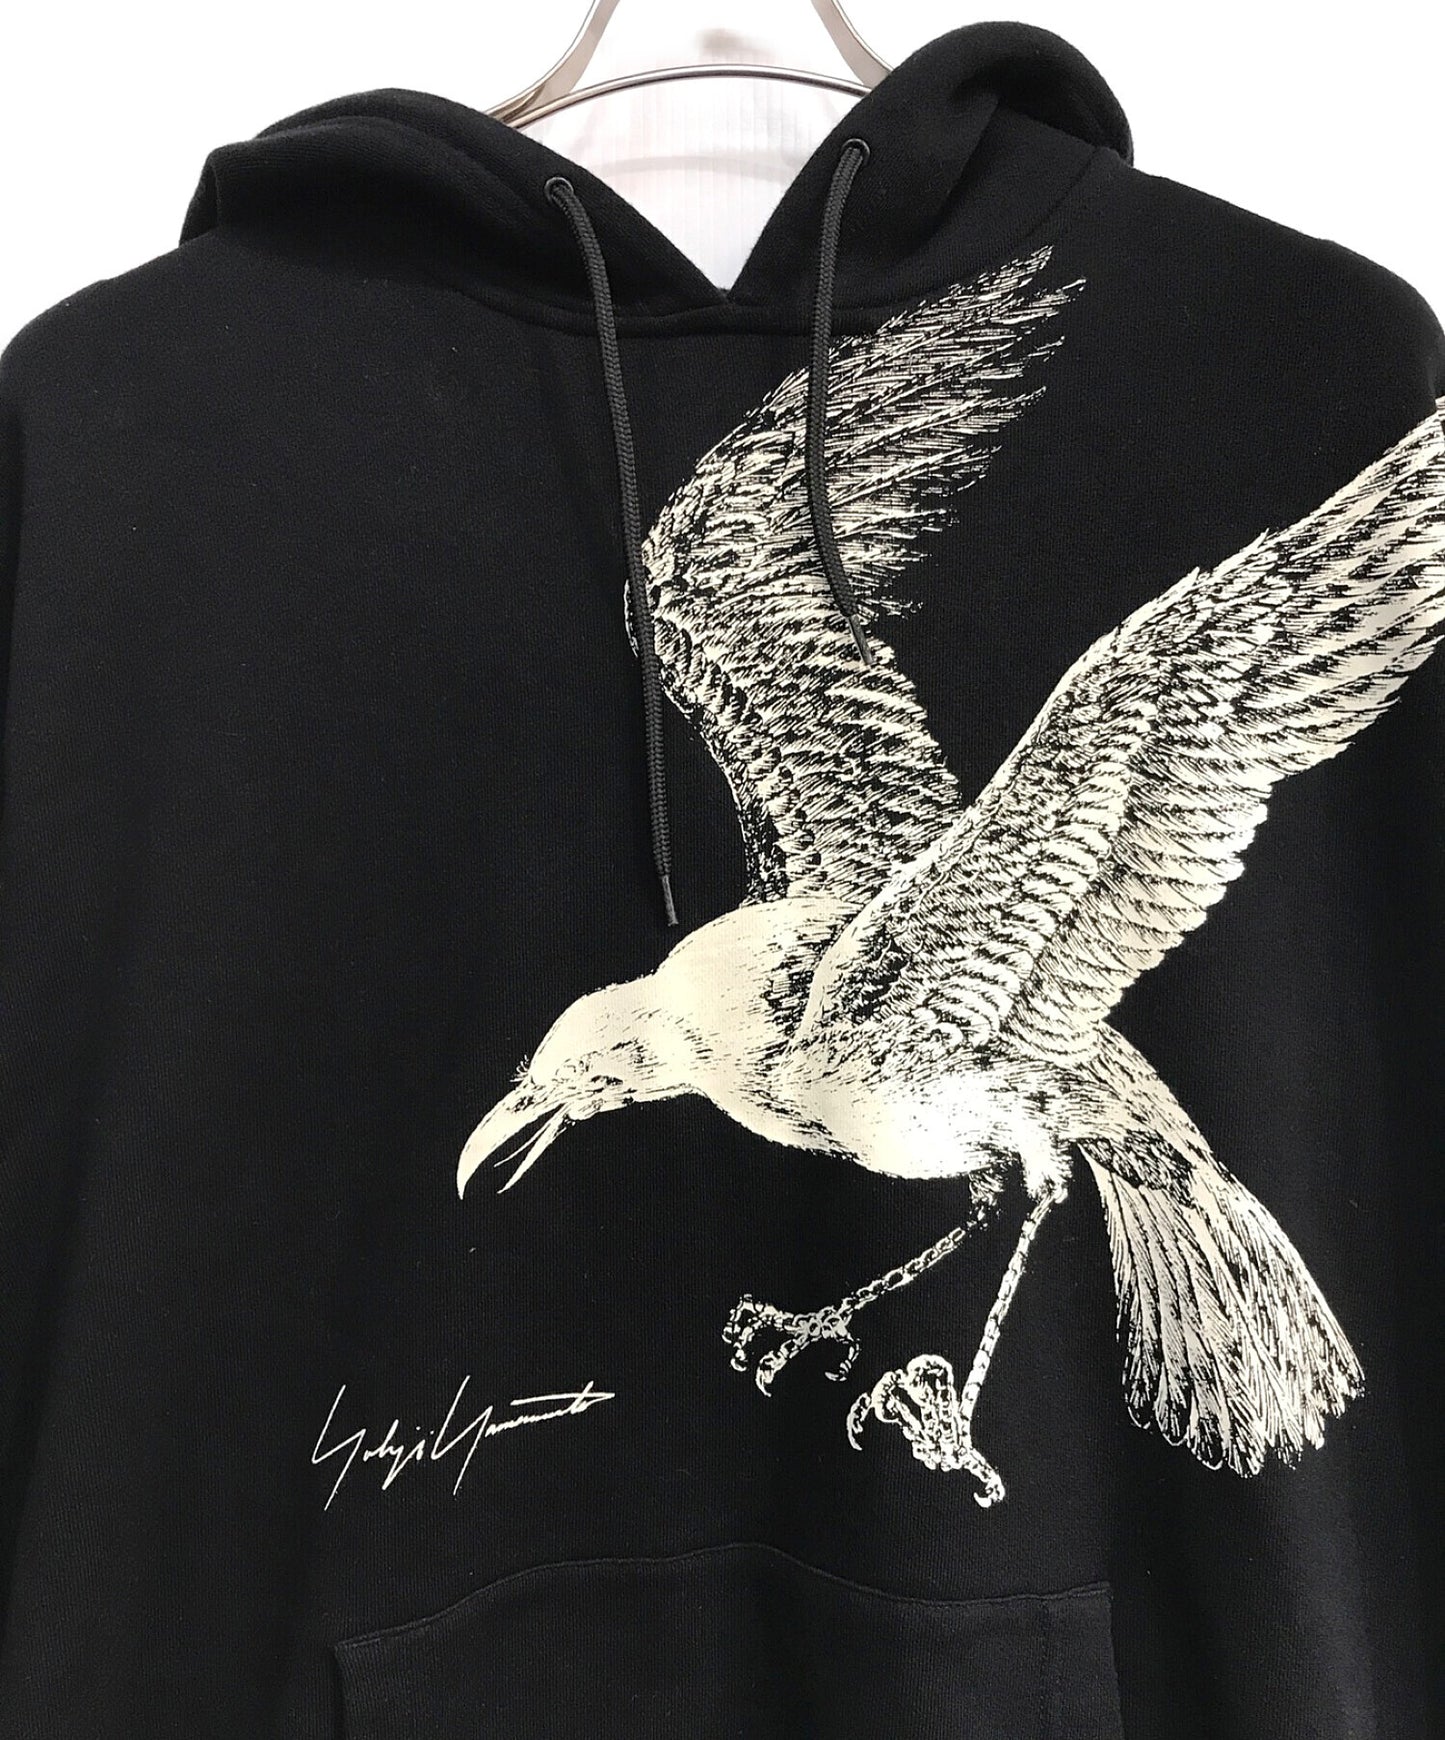 Yohji Yamamoto Pour Homme Crow Print Sweat Pullover Hoodie HG-T97-997 HG-T97-997